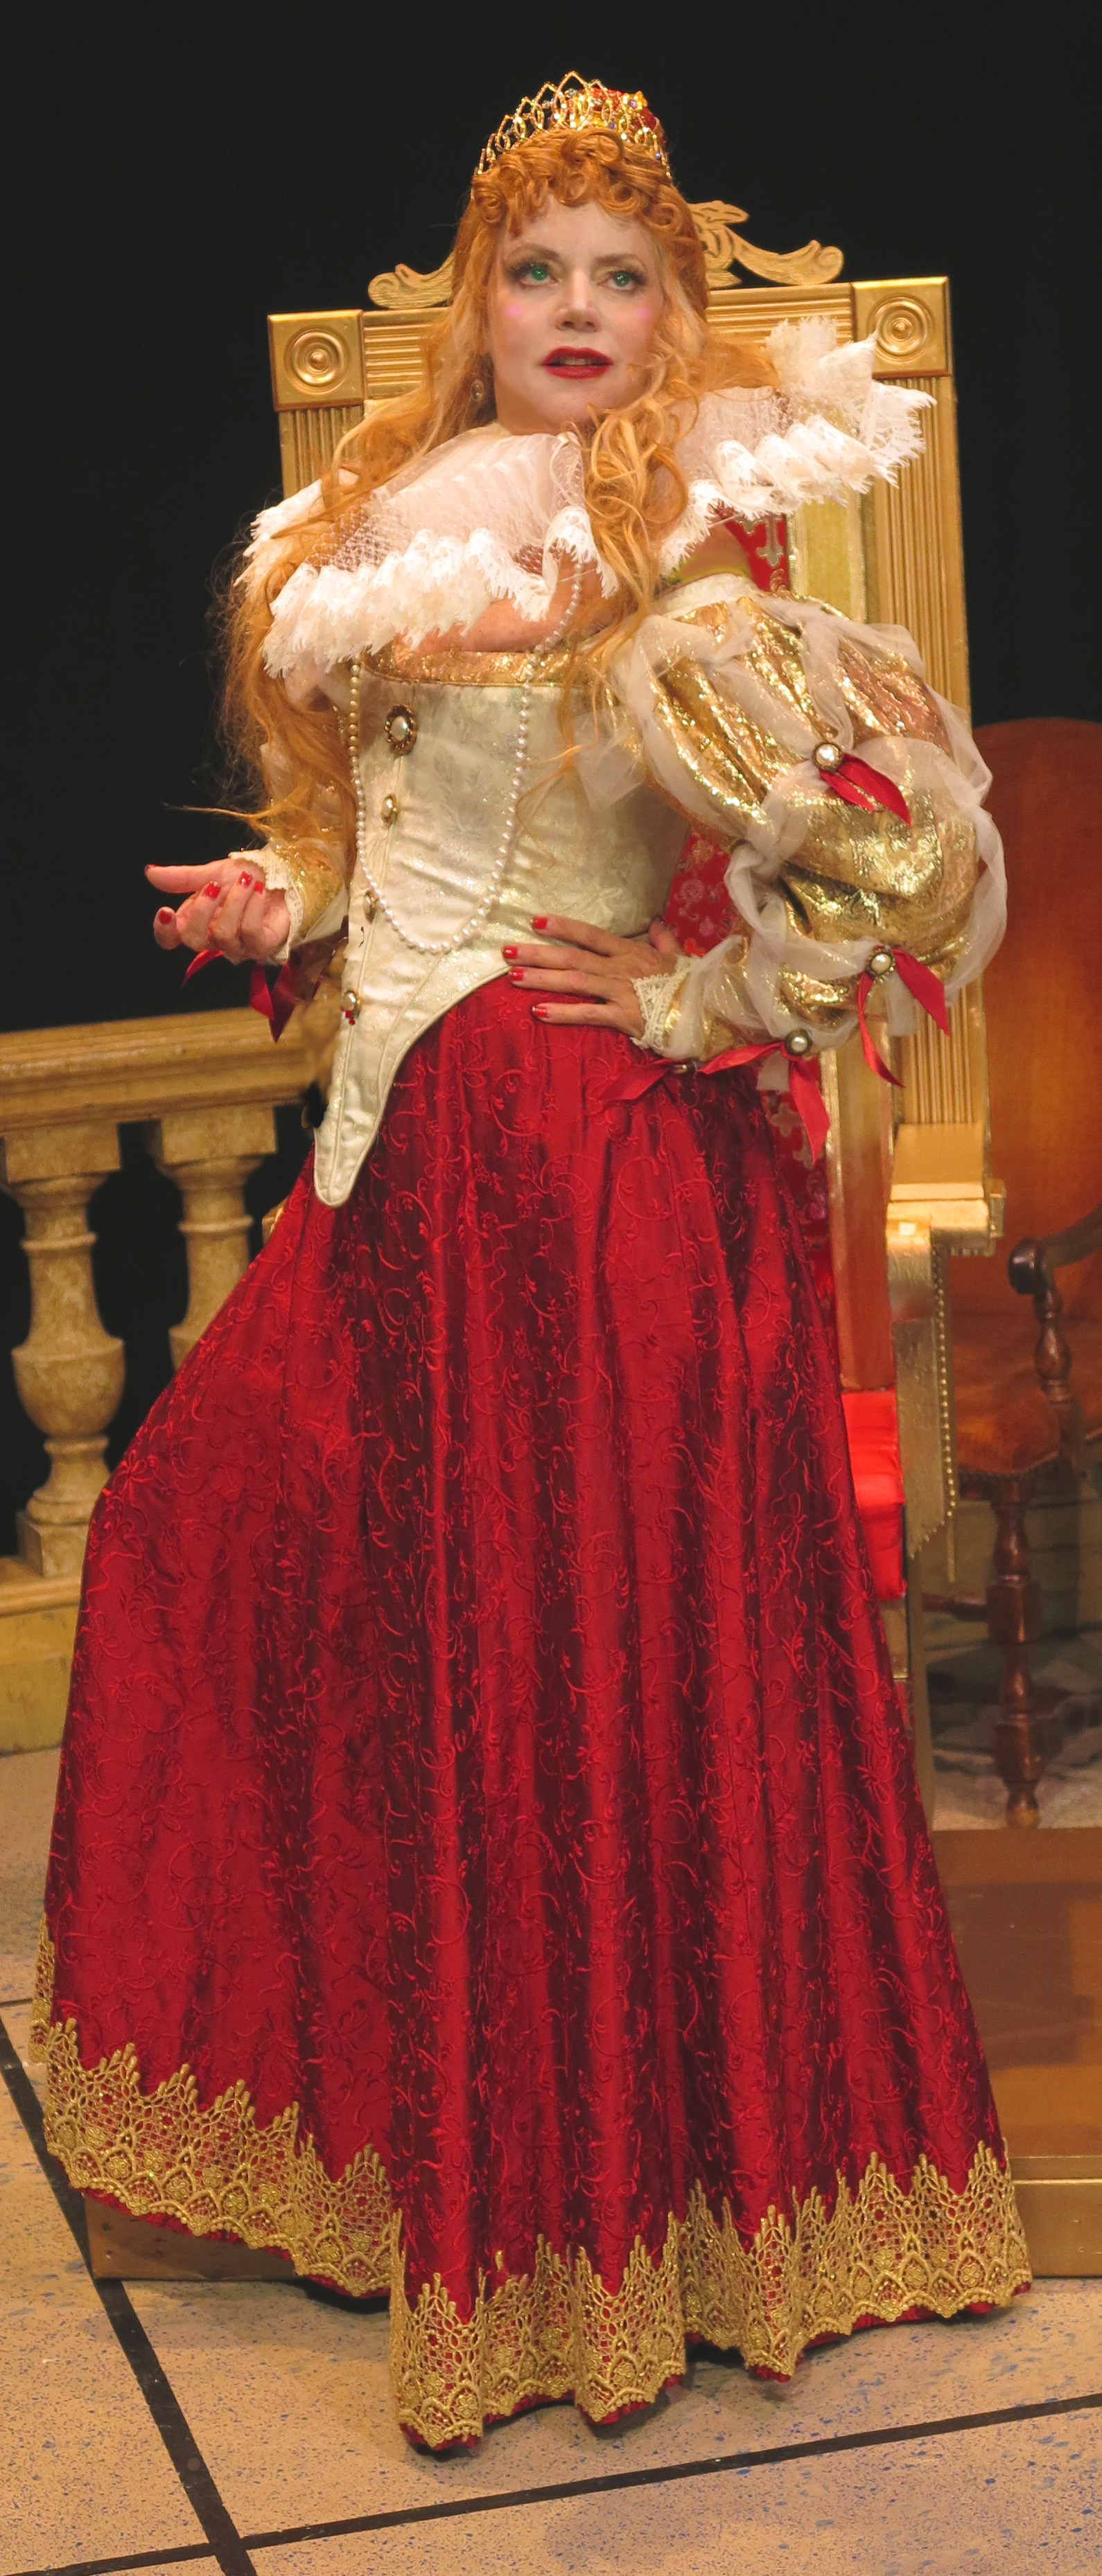 Phoebe Legere stars as Elizabeth l, the genius Queen, in the upcoming film Shakespeare and Elizabeth, the Reality Show